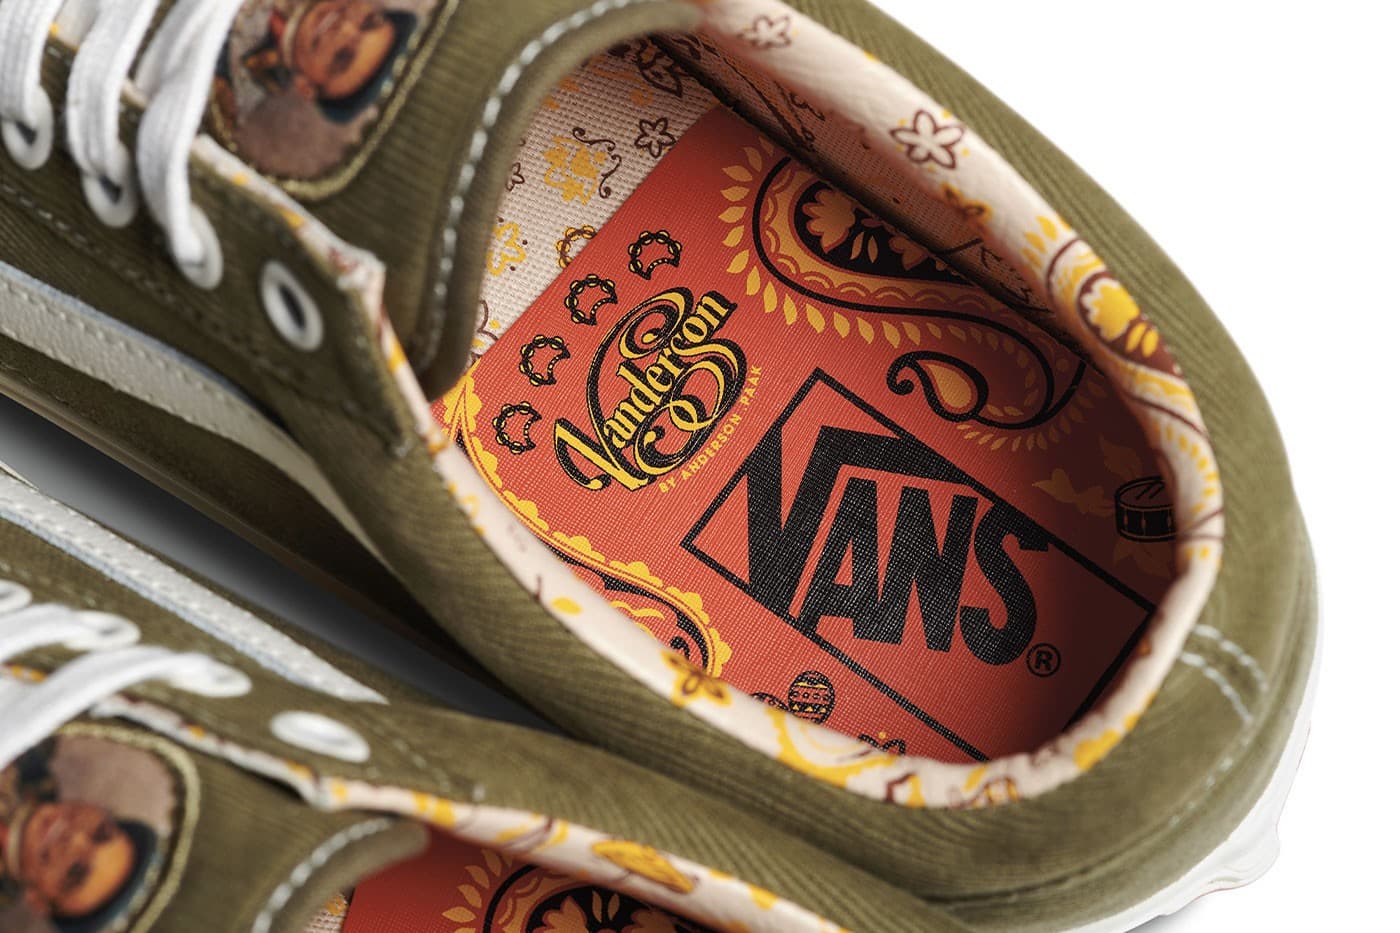 vans-anderson-paak-collab-collection-release-info-006.jpg